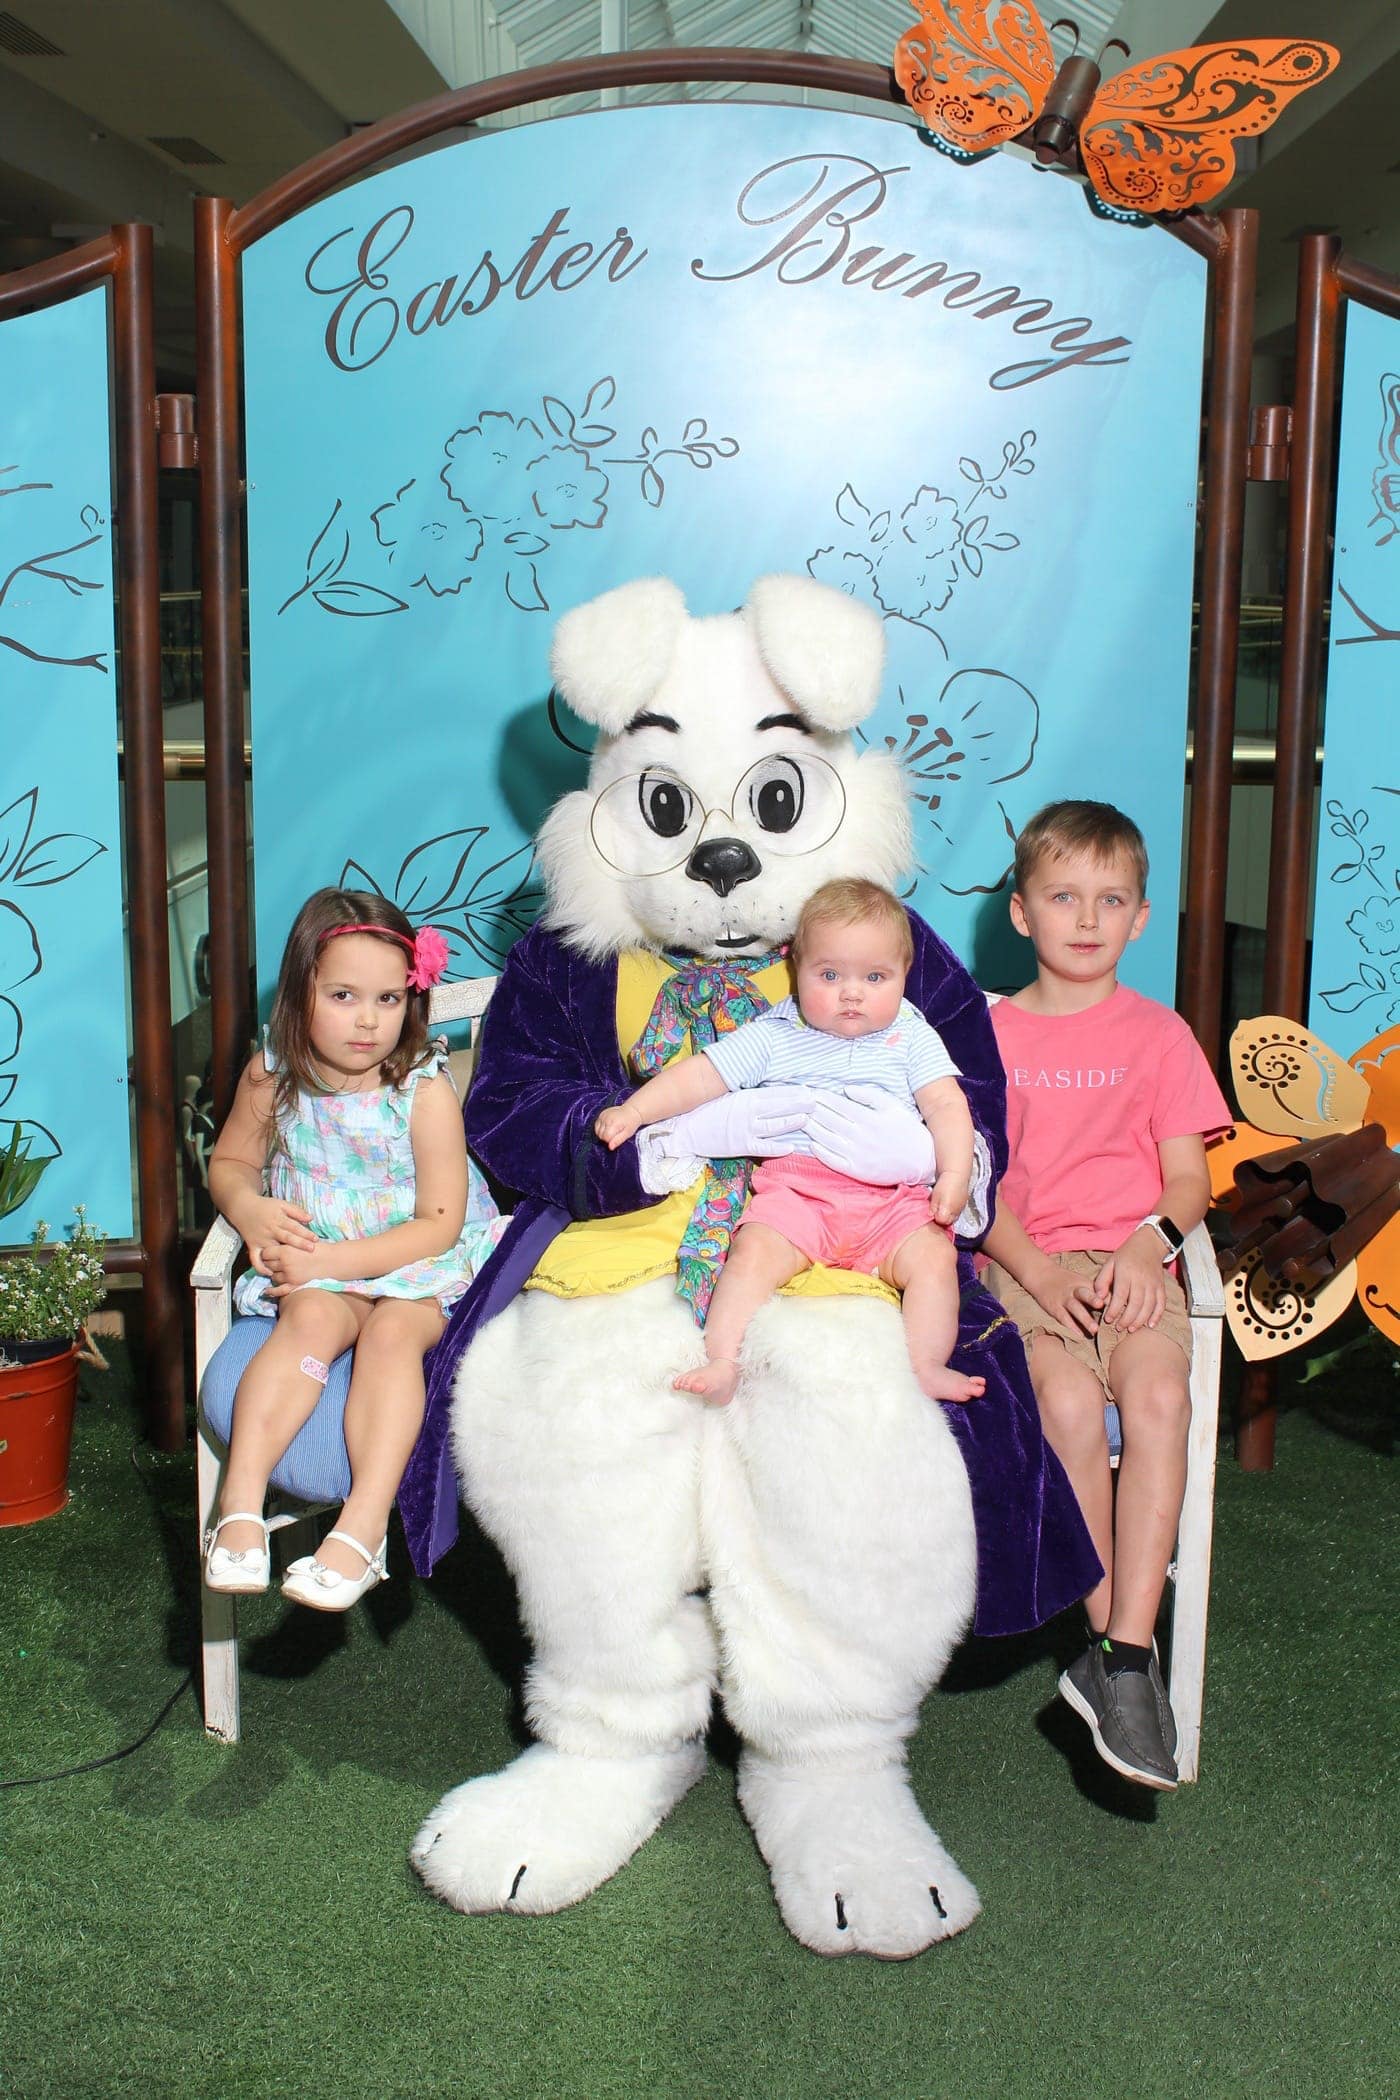 Visiting the Easter bunny